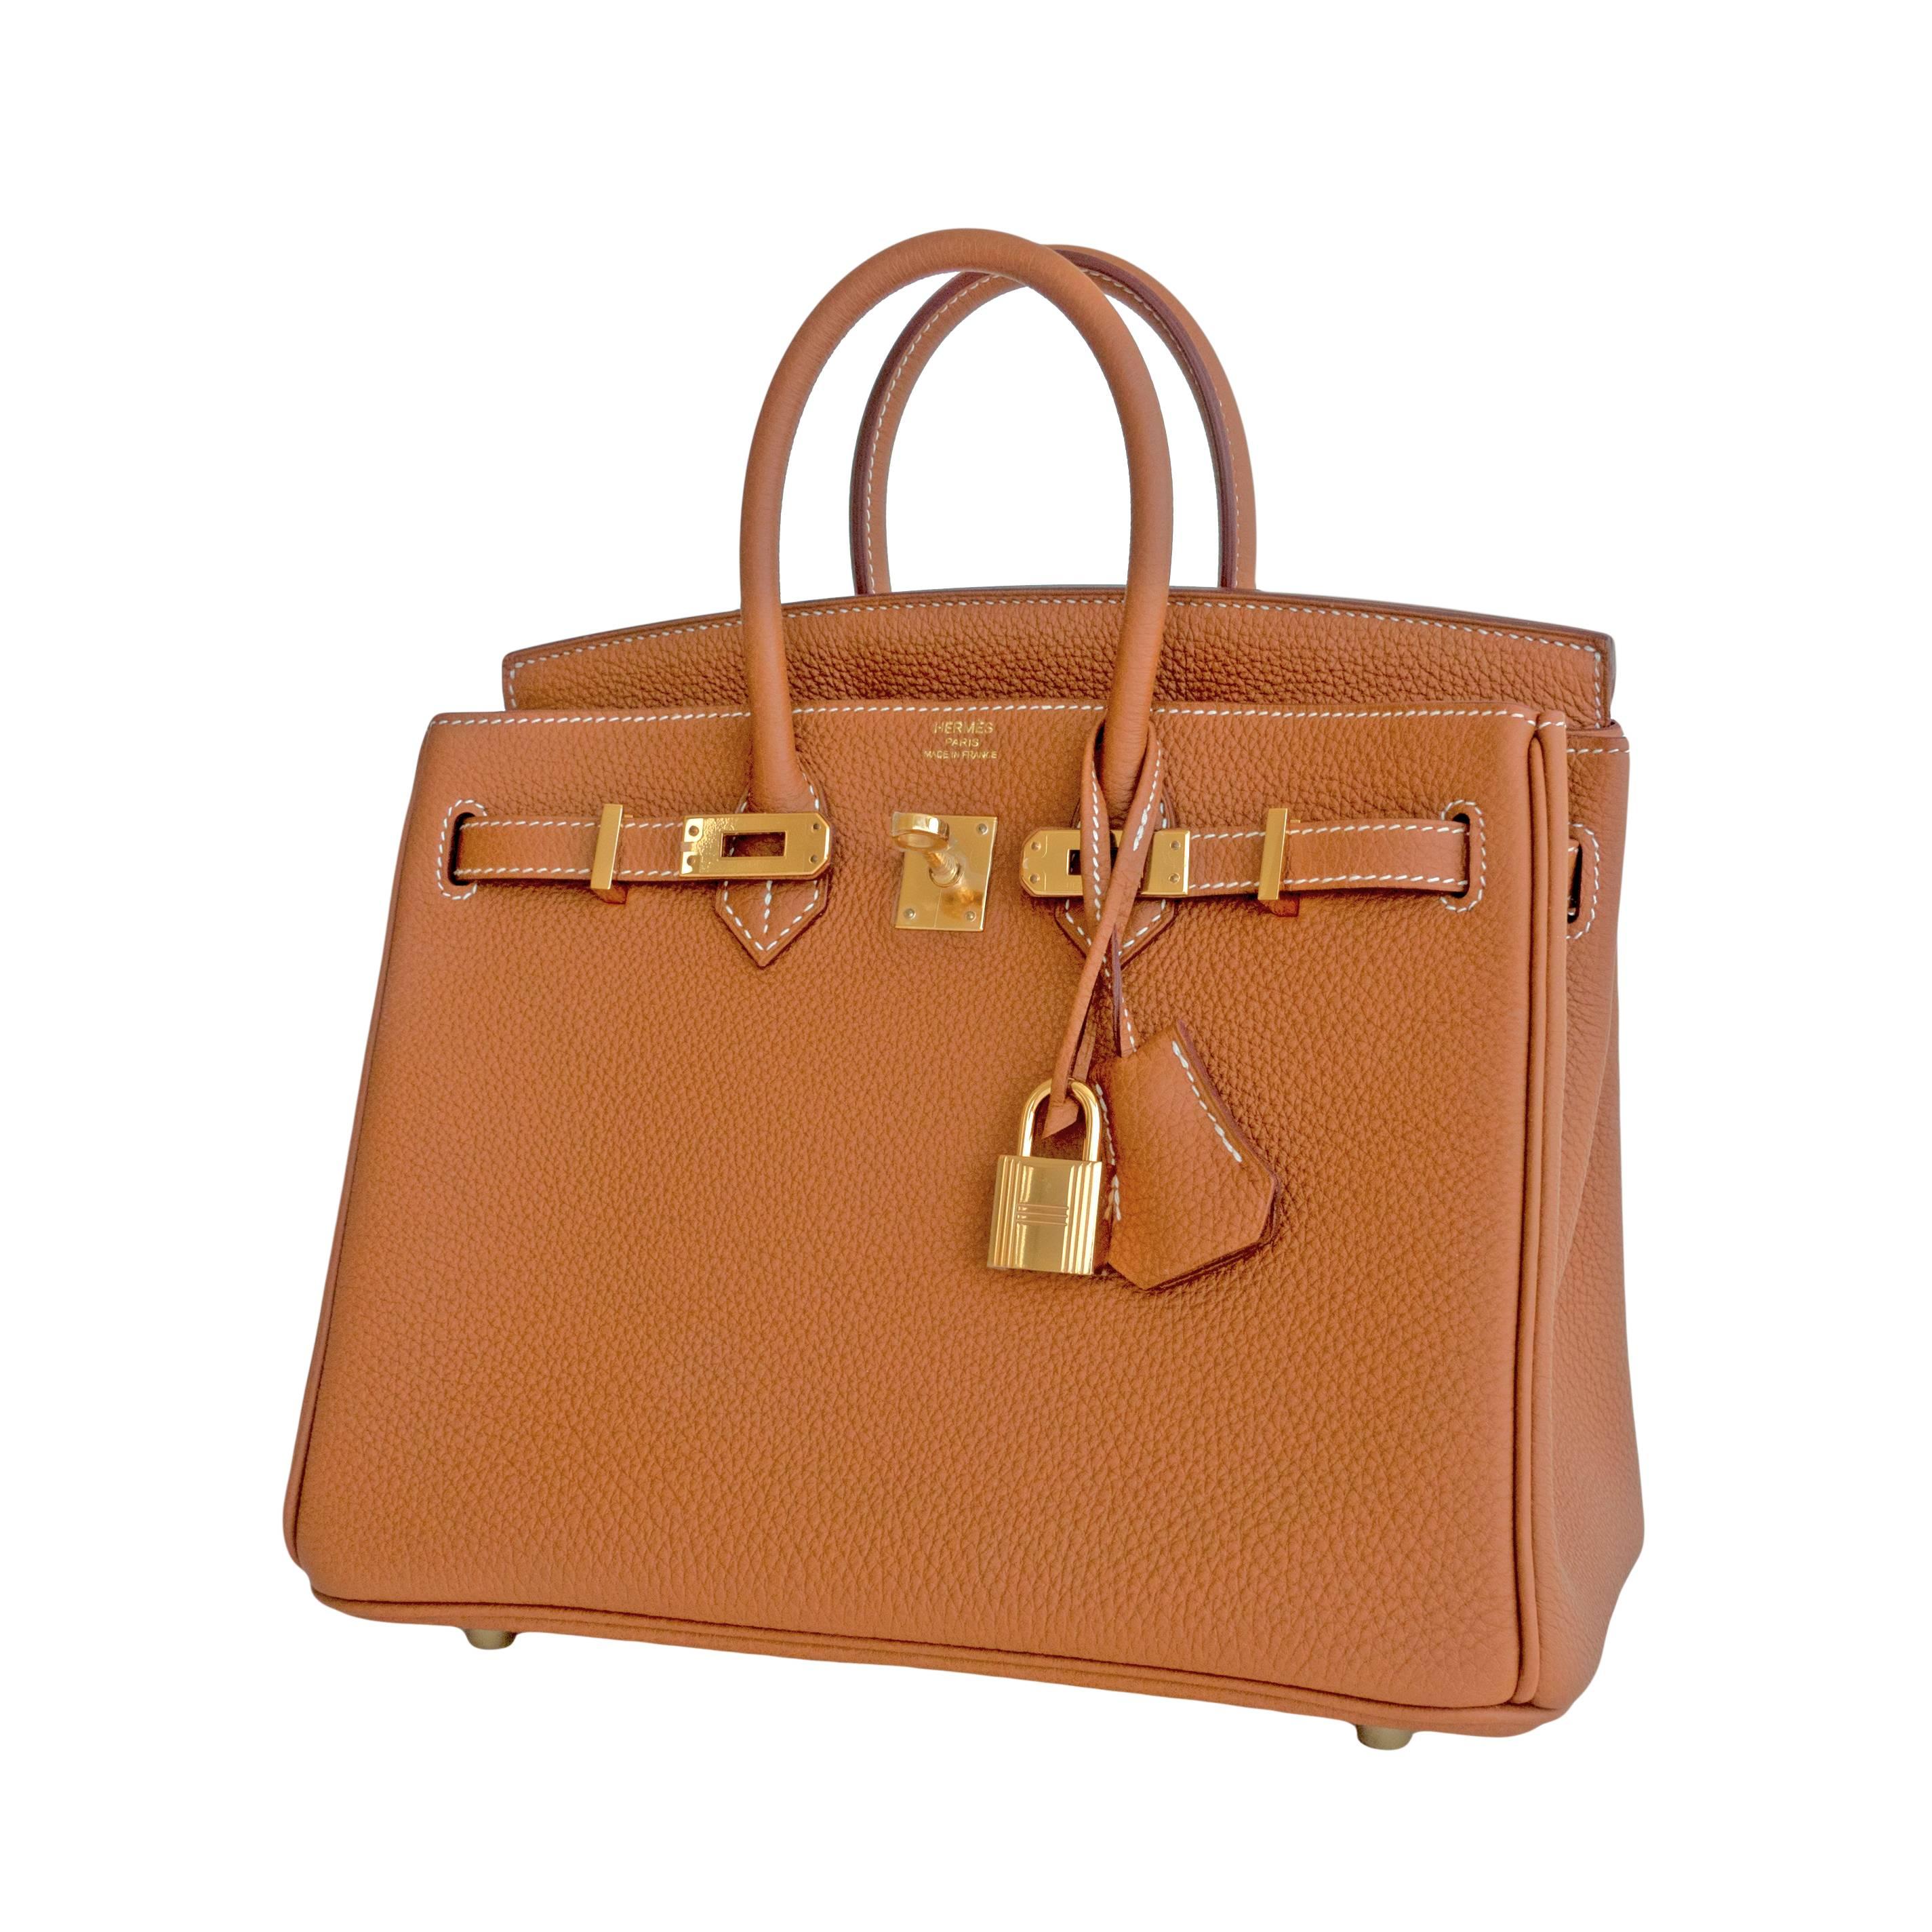 Hermes Gold Baby Birkin 25cm Camel Togo Gold GHW Jewel 
Brand New in Box. Store Fresh. 
Perfect gift! Comes full set with keys, lock, clochette, a sleeper for the bag, rain protector, and Hermes box.
The Gold 25 Birkin is a highly coveted and